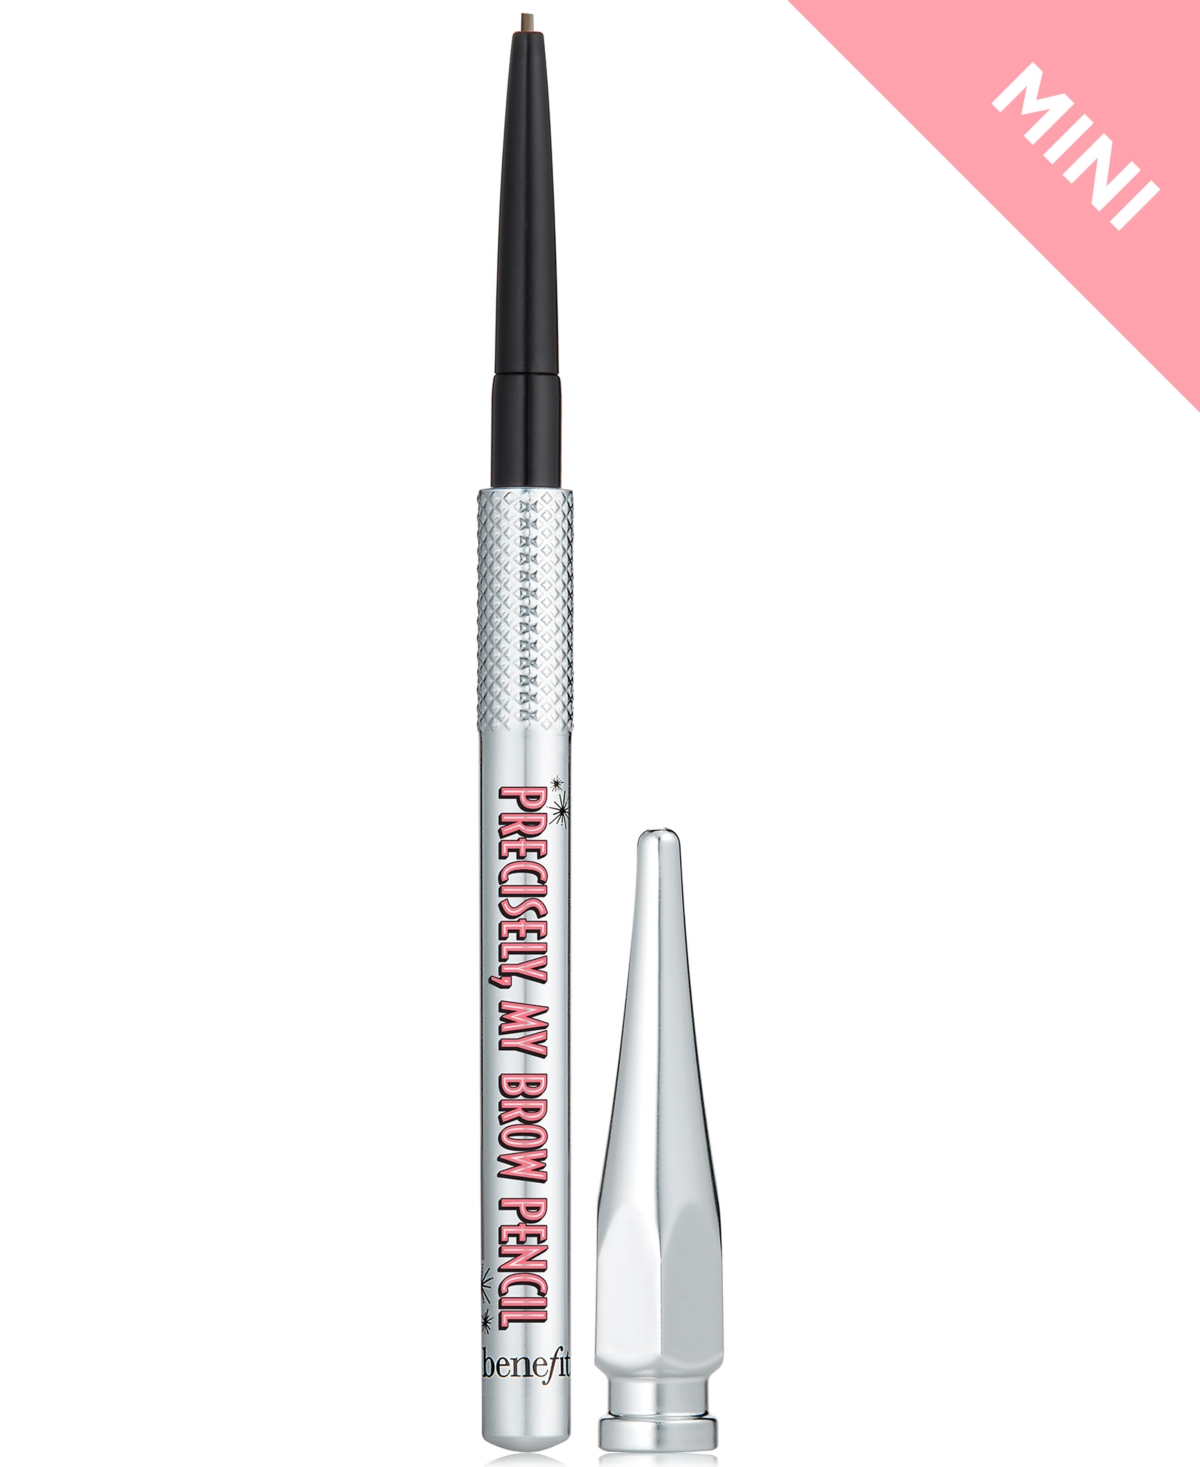 Benefit Cosmetics Precisely, My Brow Pencil Waterproof Eyebrow Definer, Travel Size In Shade . - Light (neutral Blonde)